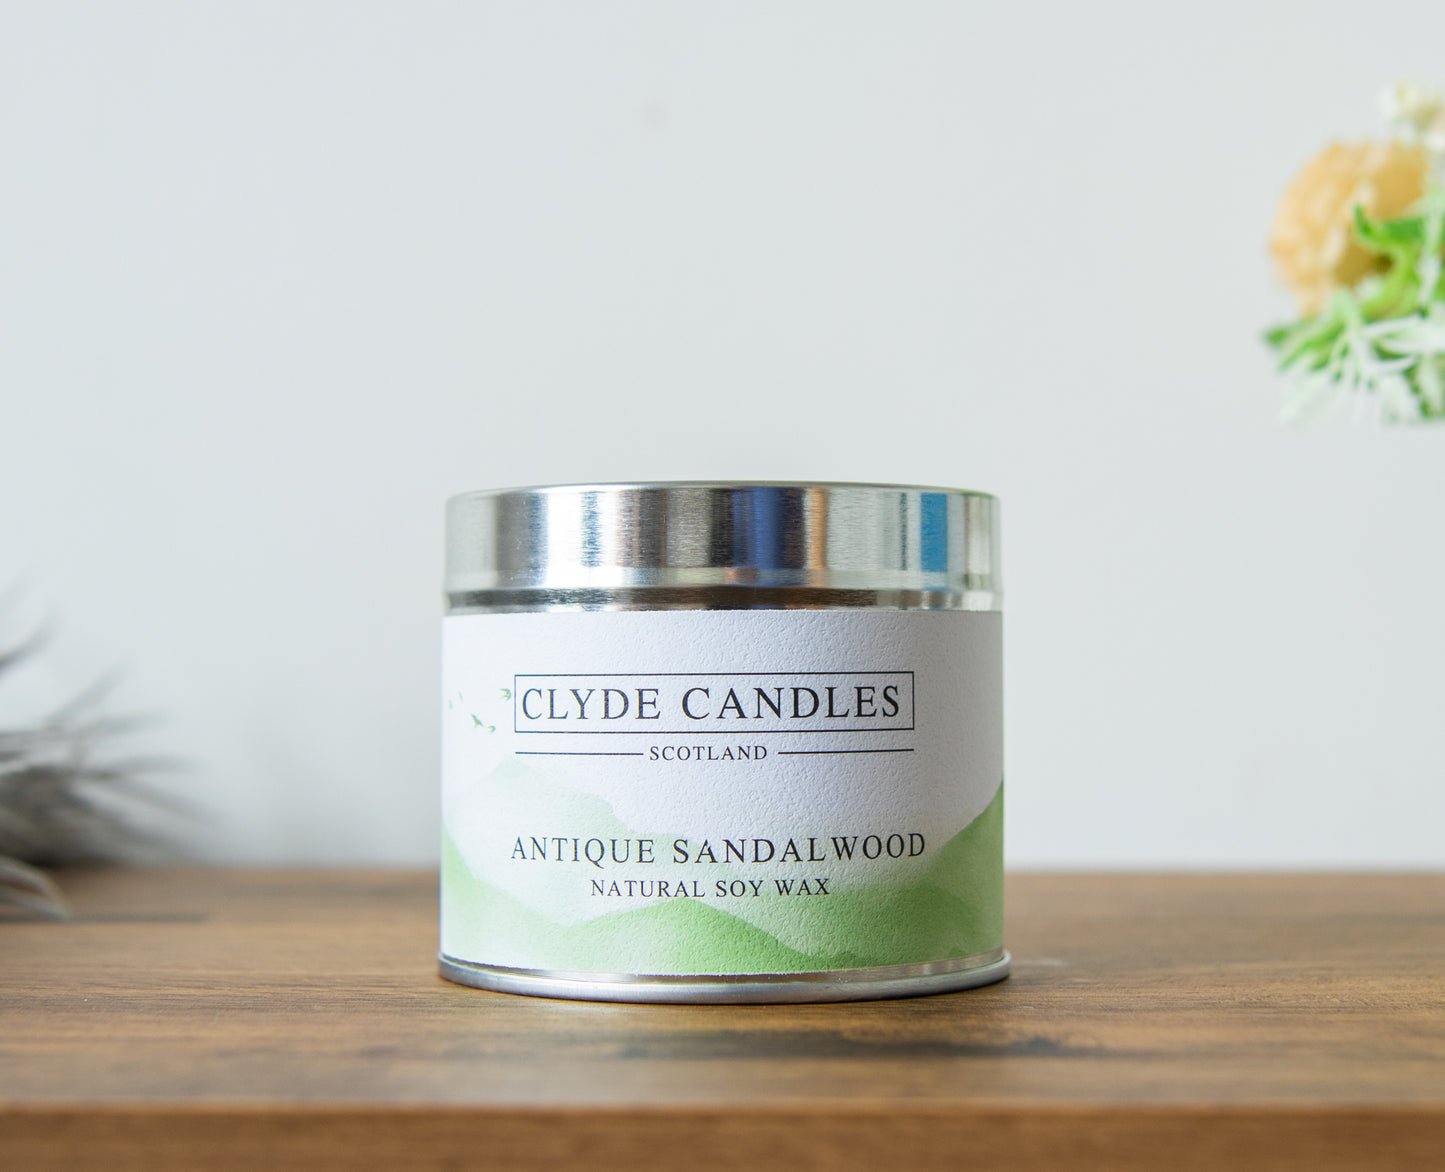 Antique Sandalwood Scented Candle Tin, Natural soy wax, Scottish Candles, Clyde Candles